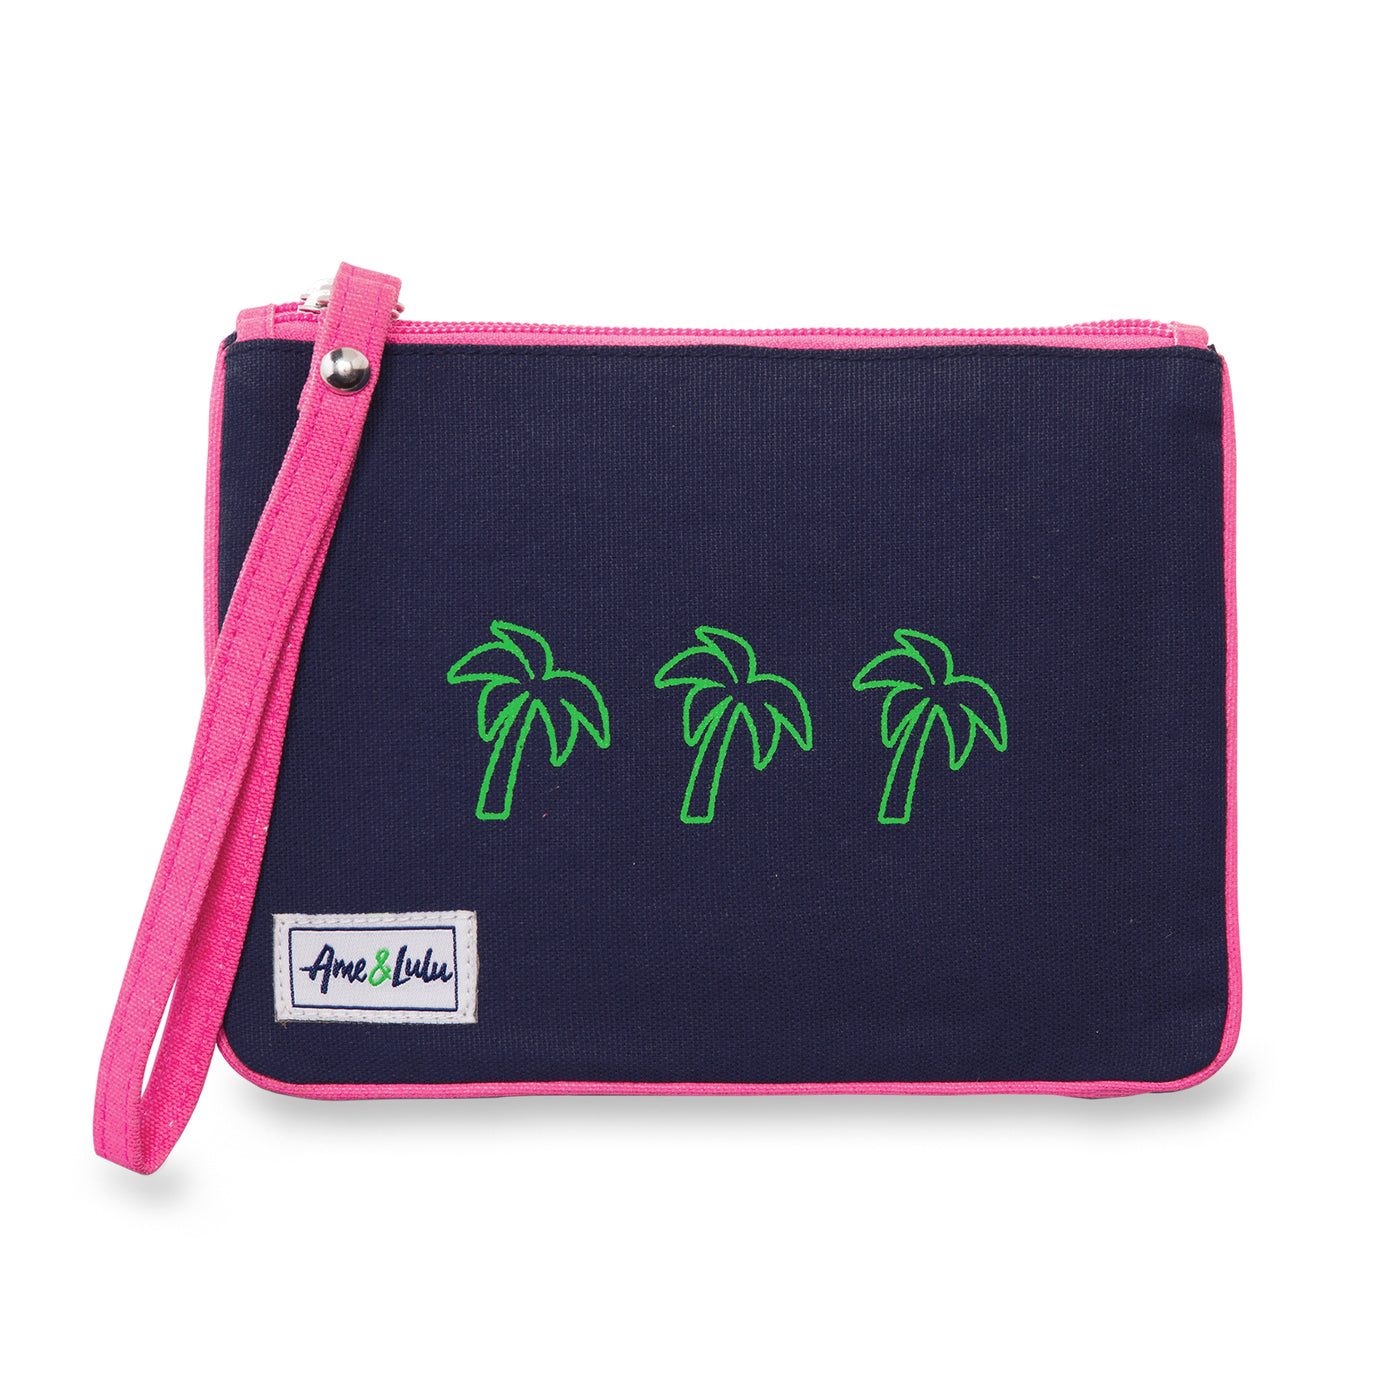 Small navy canvas wristlet pouch with hot pink trim and strap. Front has three green palm trees in a line printed on